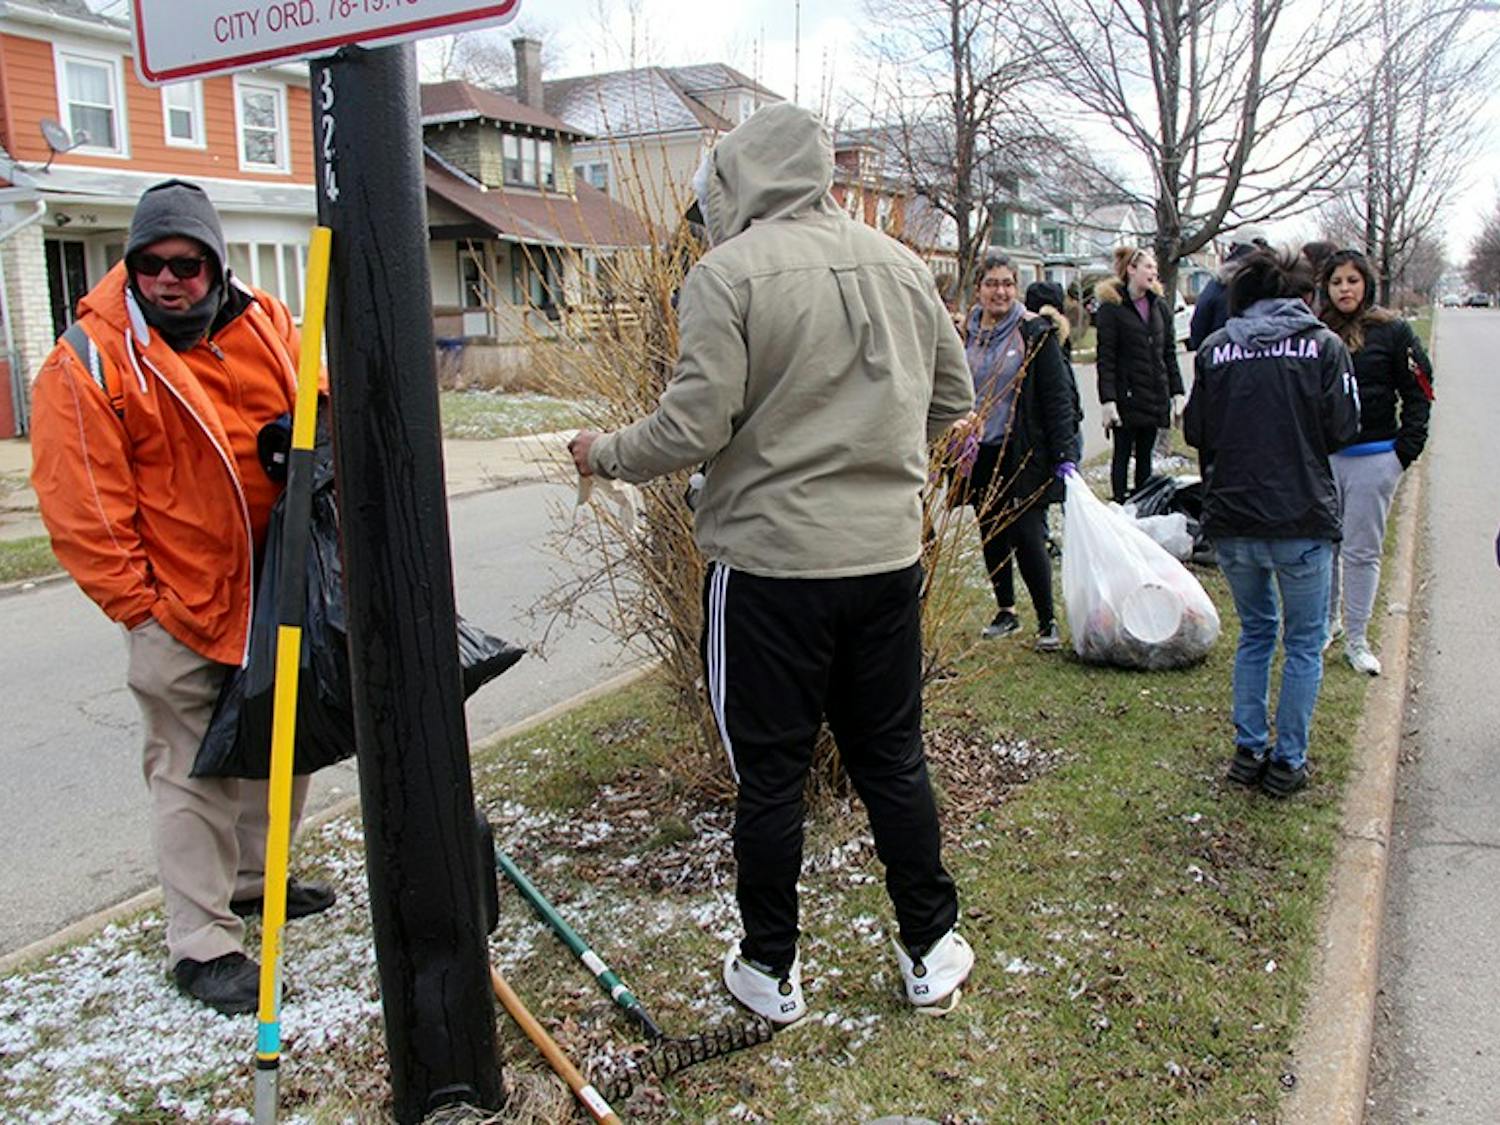 Students turned out Saturday despite chilly weather for UB’s bi-annual community service day.